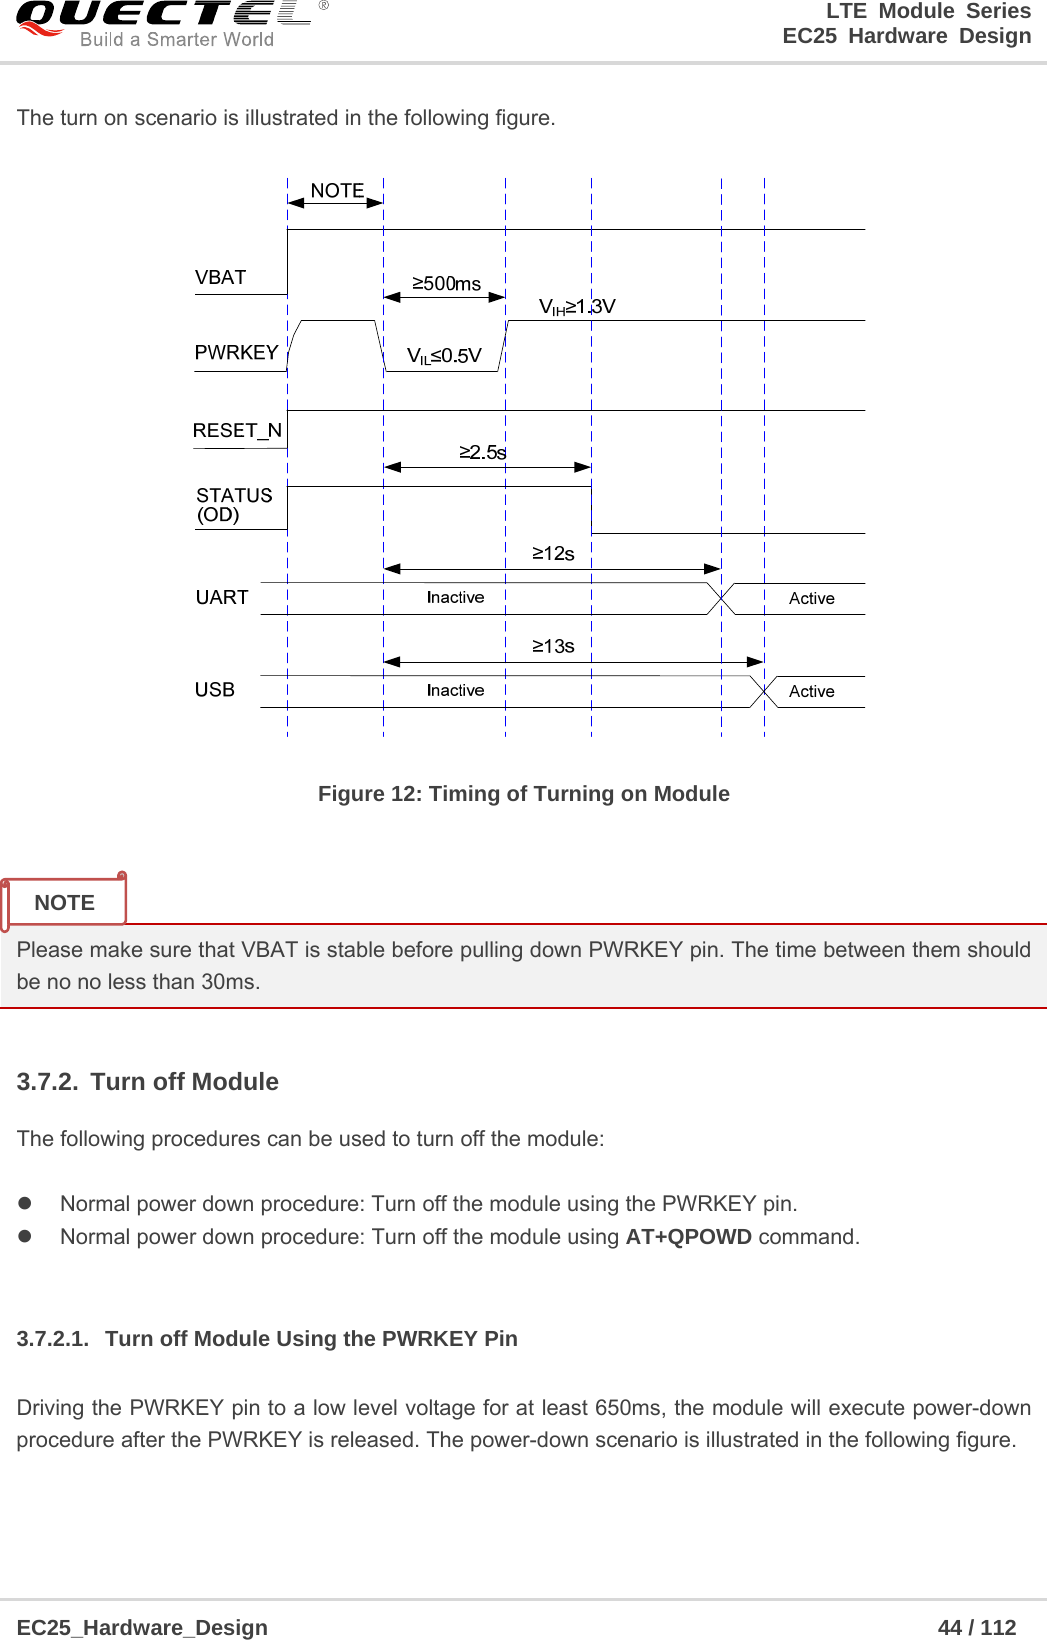 LTE Module Series                                                  EC25 Hardware Design  EC25_Hardware_Design                                                             44 / 112    The turn on scenario is illustrated in the following figure.  Figure 12: Timing of Turning on Module   Please make sure that VBAT is stable before pulling down PWRKEY pin. The time between them should be no no less than 30ms.  3.7.2. Turn off Module The following procedures can be used to turn off the module:    Normal power down procedure: Turn off the module using the PWRKEY pin.   Normal power down procedure: Turn off the module using AT+QPOWD command.  3.7.2.1.  Turn off Module Using the PWRKEY Pin Driving the PWRKEY pin to a low level voltage for at least 650ms, the module will execute power-down procedure after the PWRKEY is released. The power-down scenario is illustrated in the following figure. NOTE 